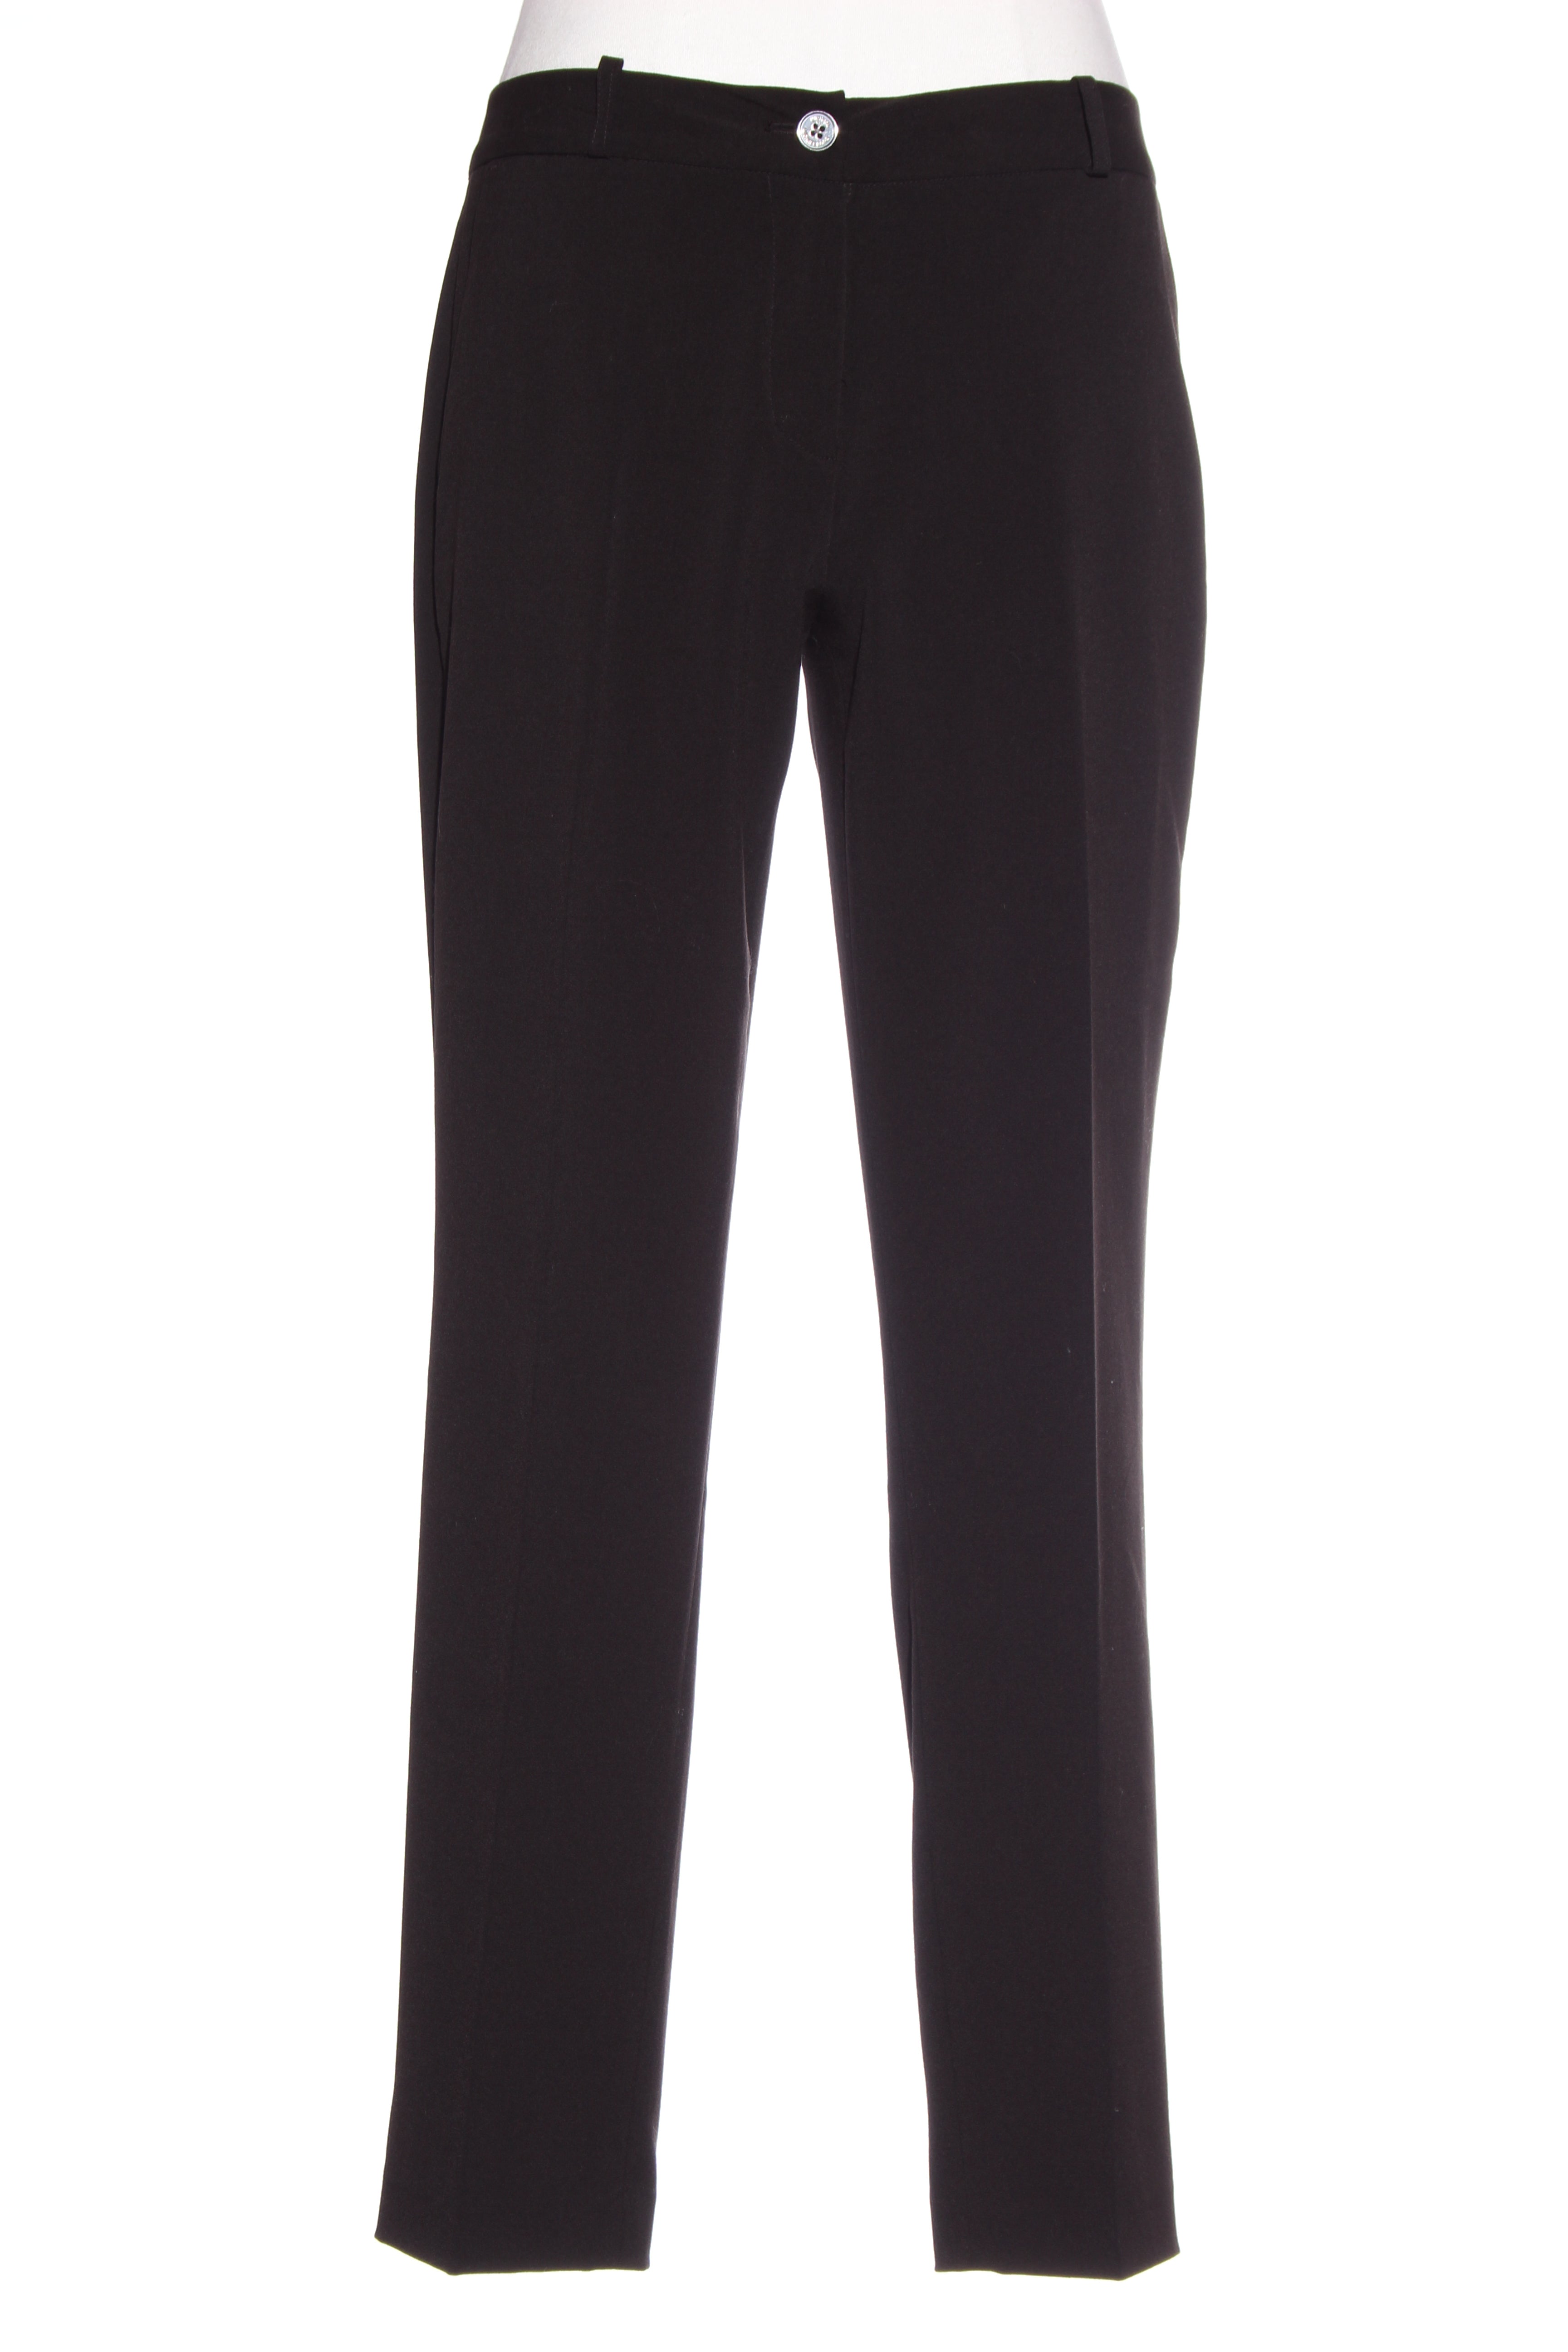 MICHAEL KORS - Dress pant! 8-10 | Recycle Style | Preloved Designer Clothing